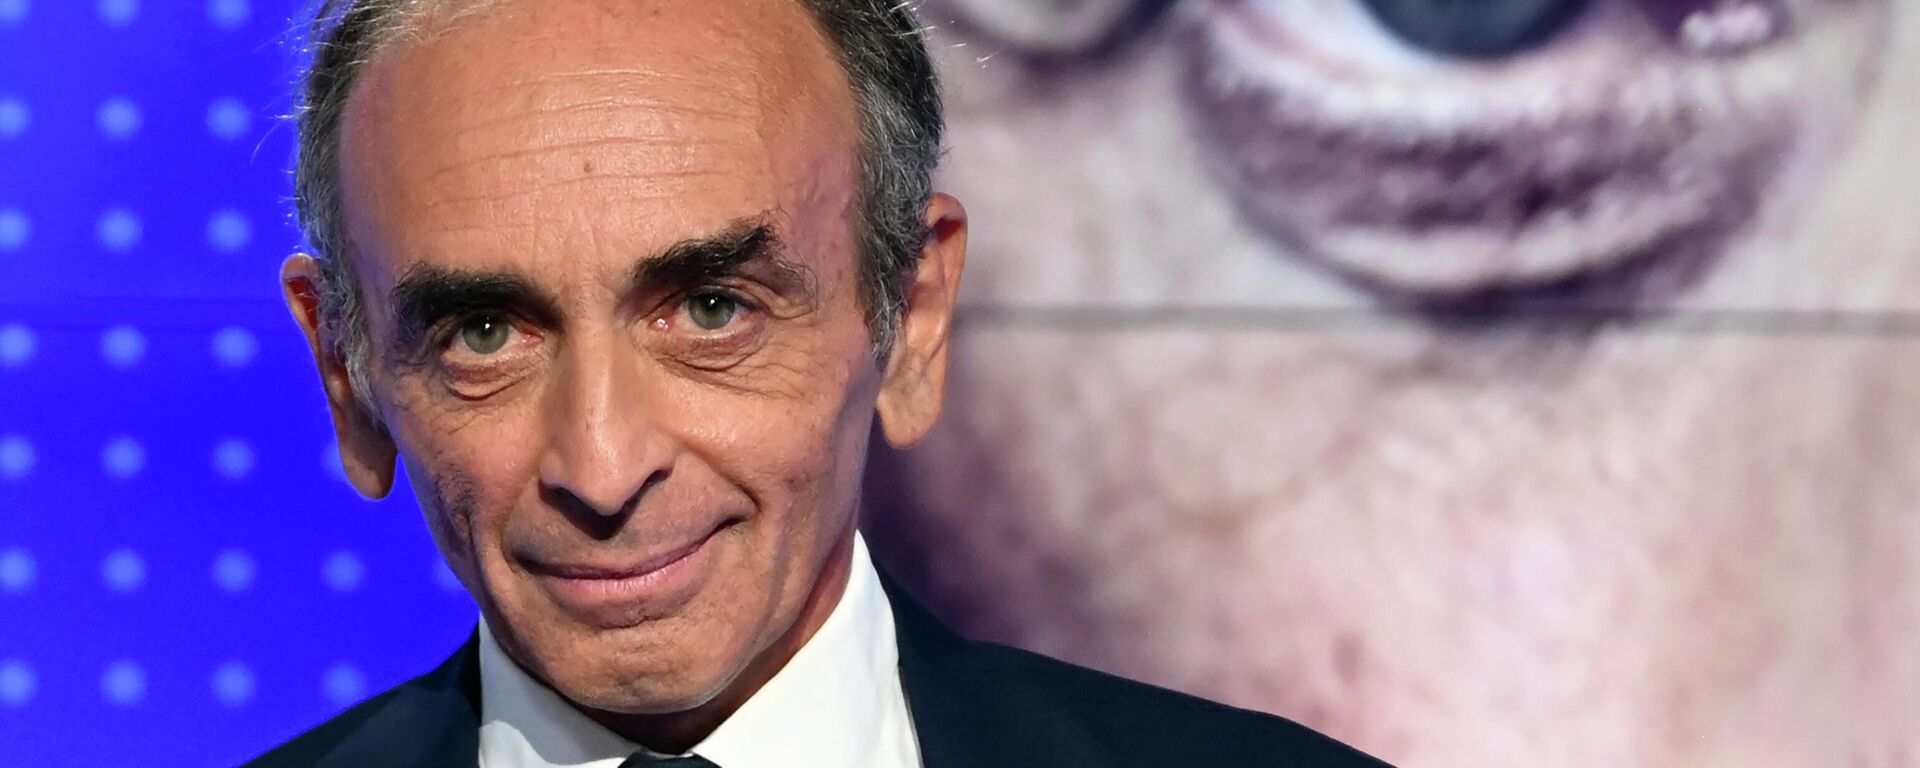 FILE - In this Sept.23, 2021 file photo, French far-right media pundit Eric Zemmour poses prior to a televised debate between French far-left leader, Jean-Luc Melenchon in Paris - Sputnik International, 1920, 29.11.2021